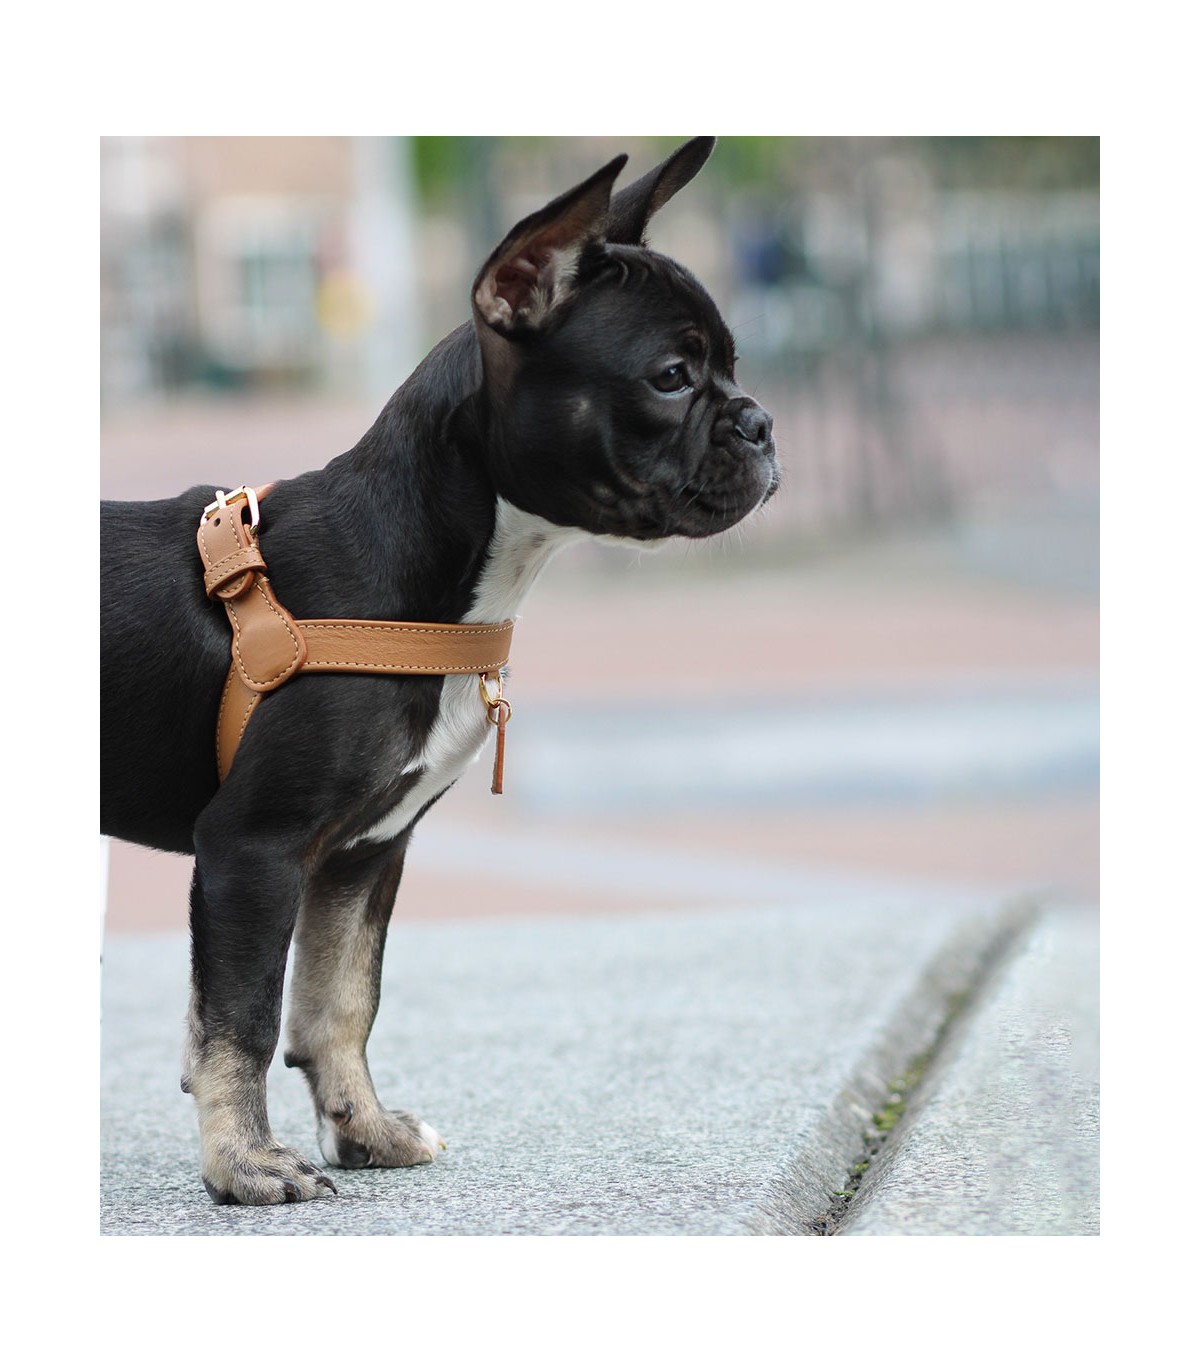 Caramel Harness - . Leather harness for dogs